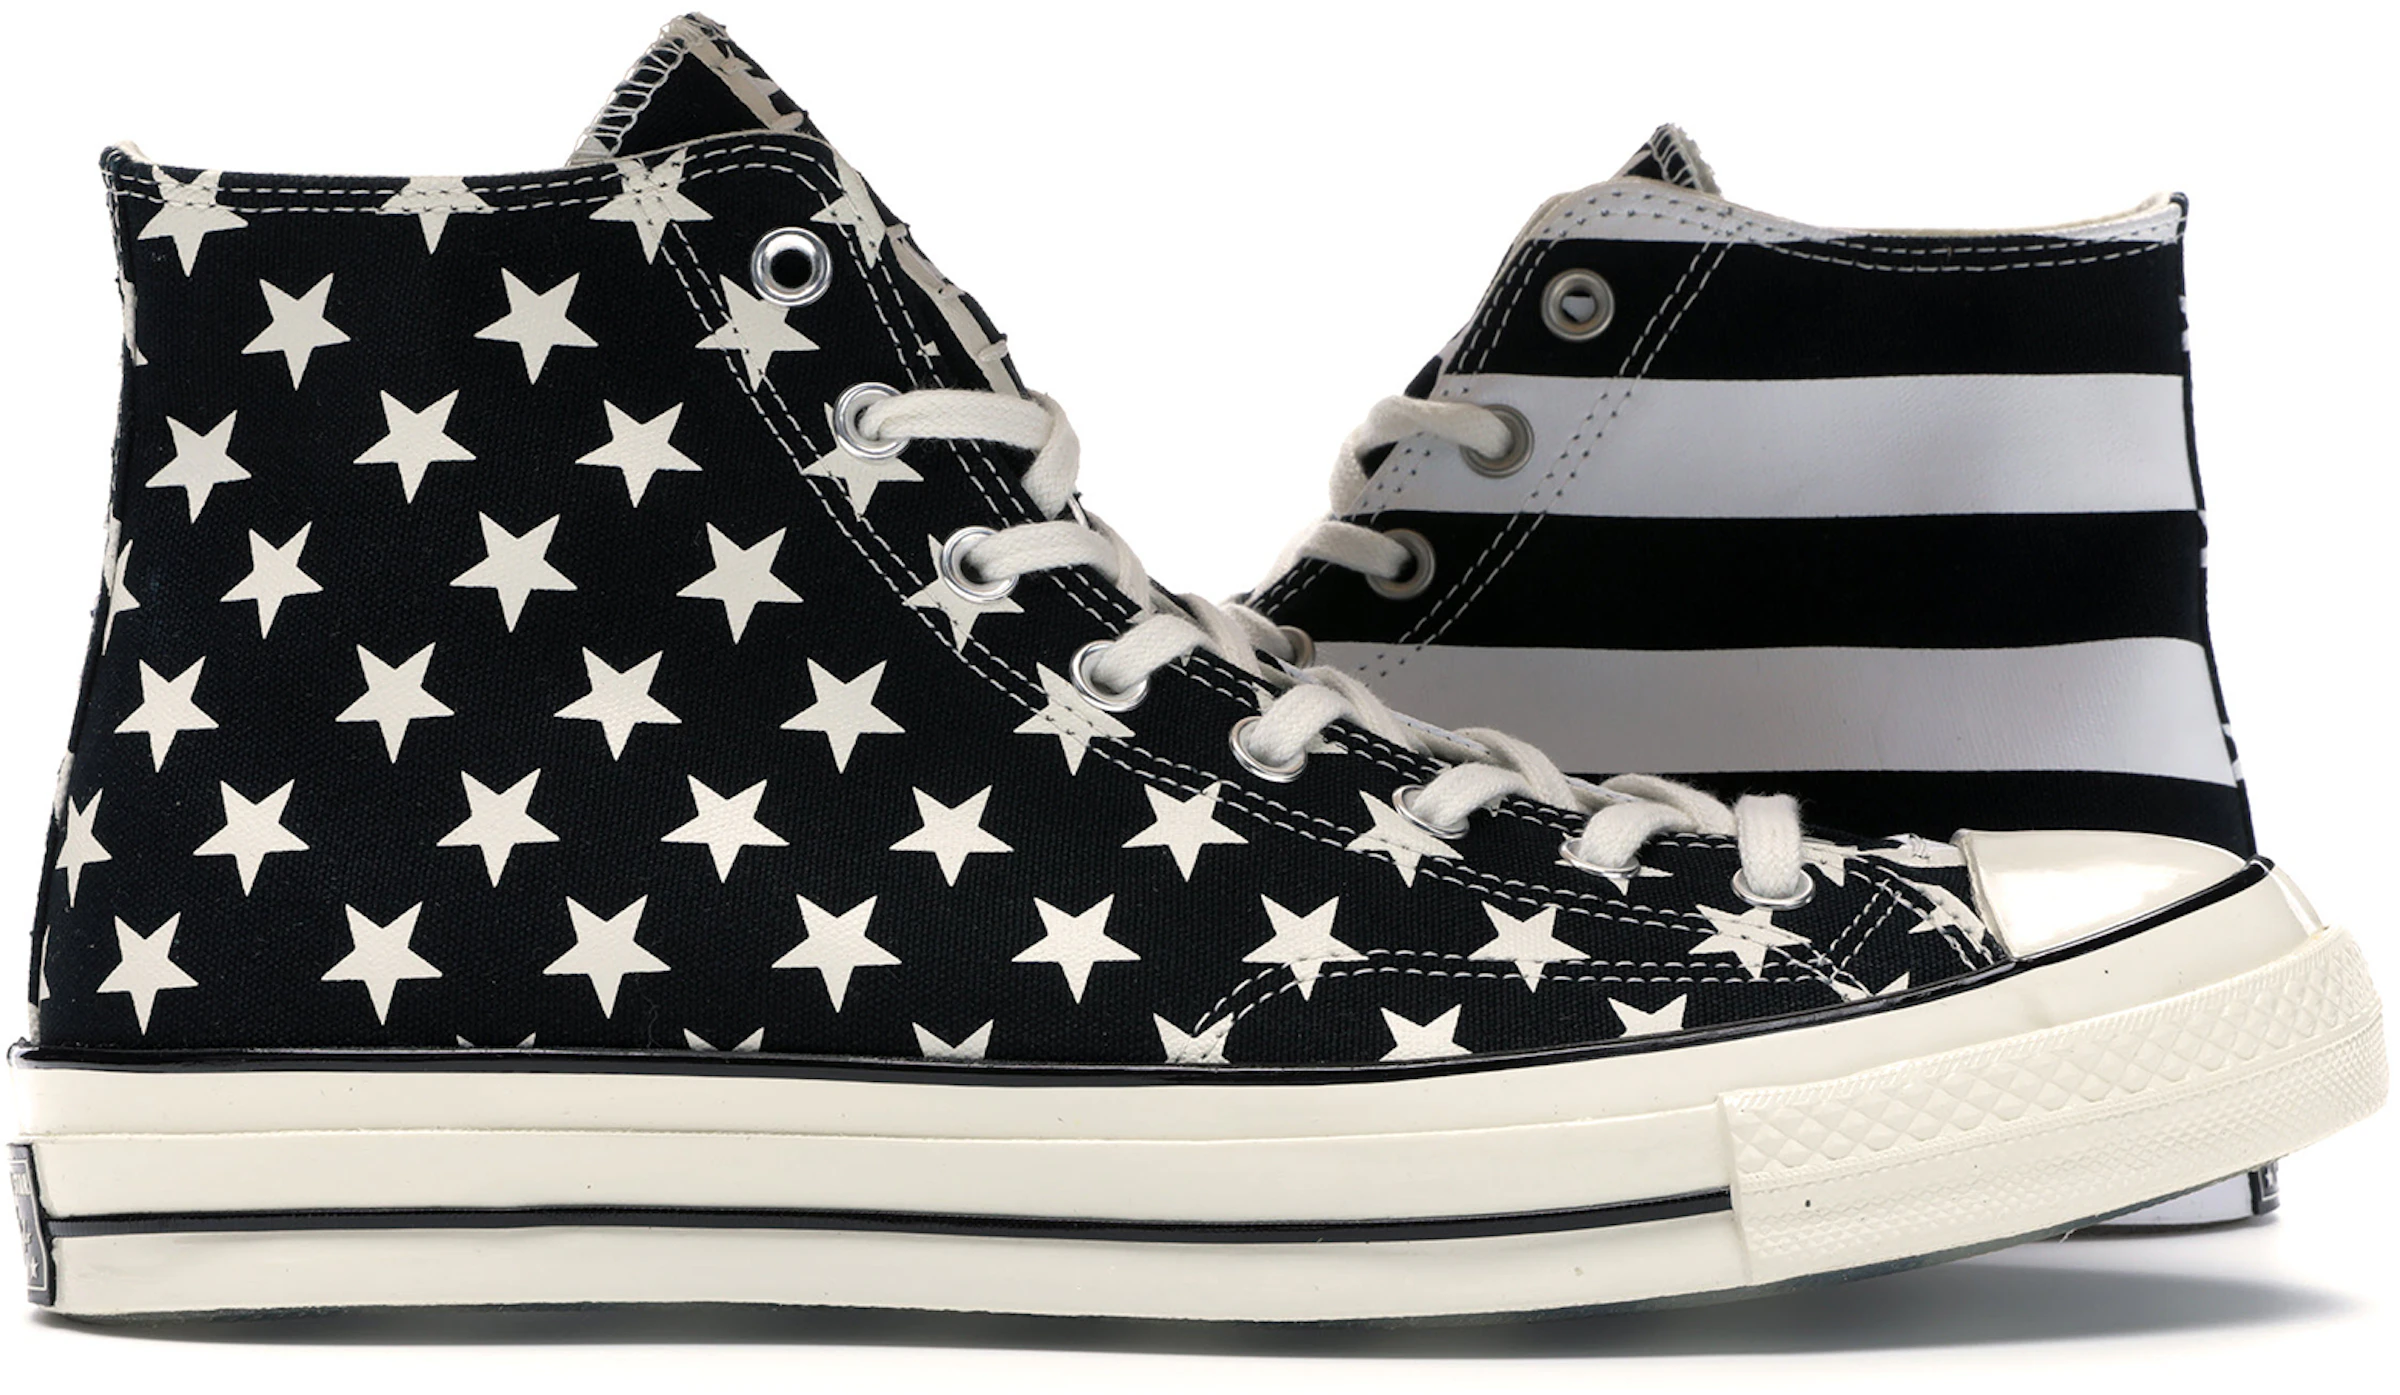 Converse Chuck Taylor Archive Restructured American Flag Black White - 166425C - US